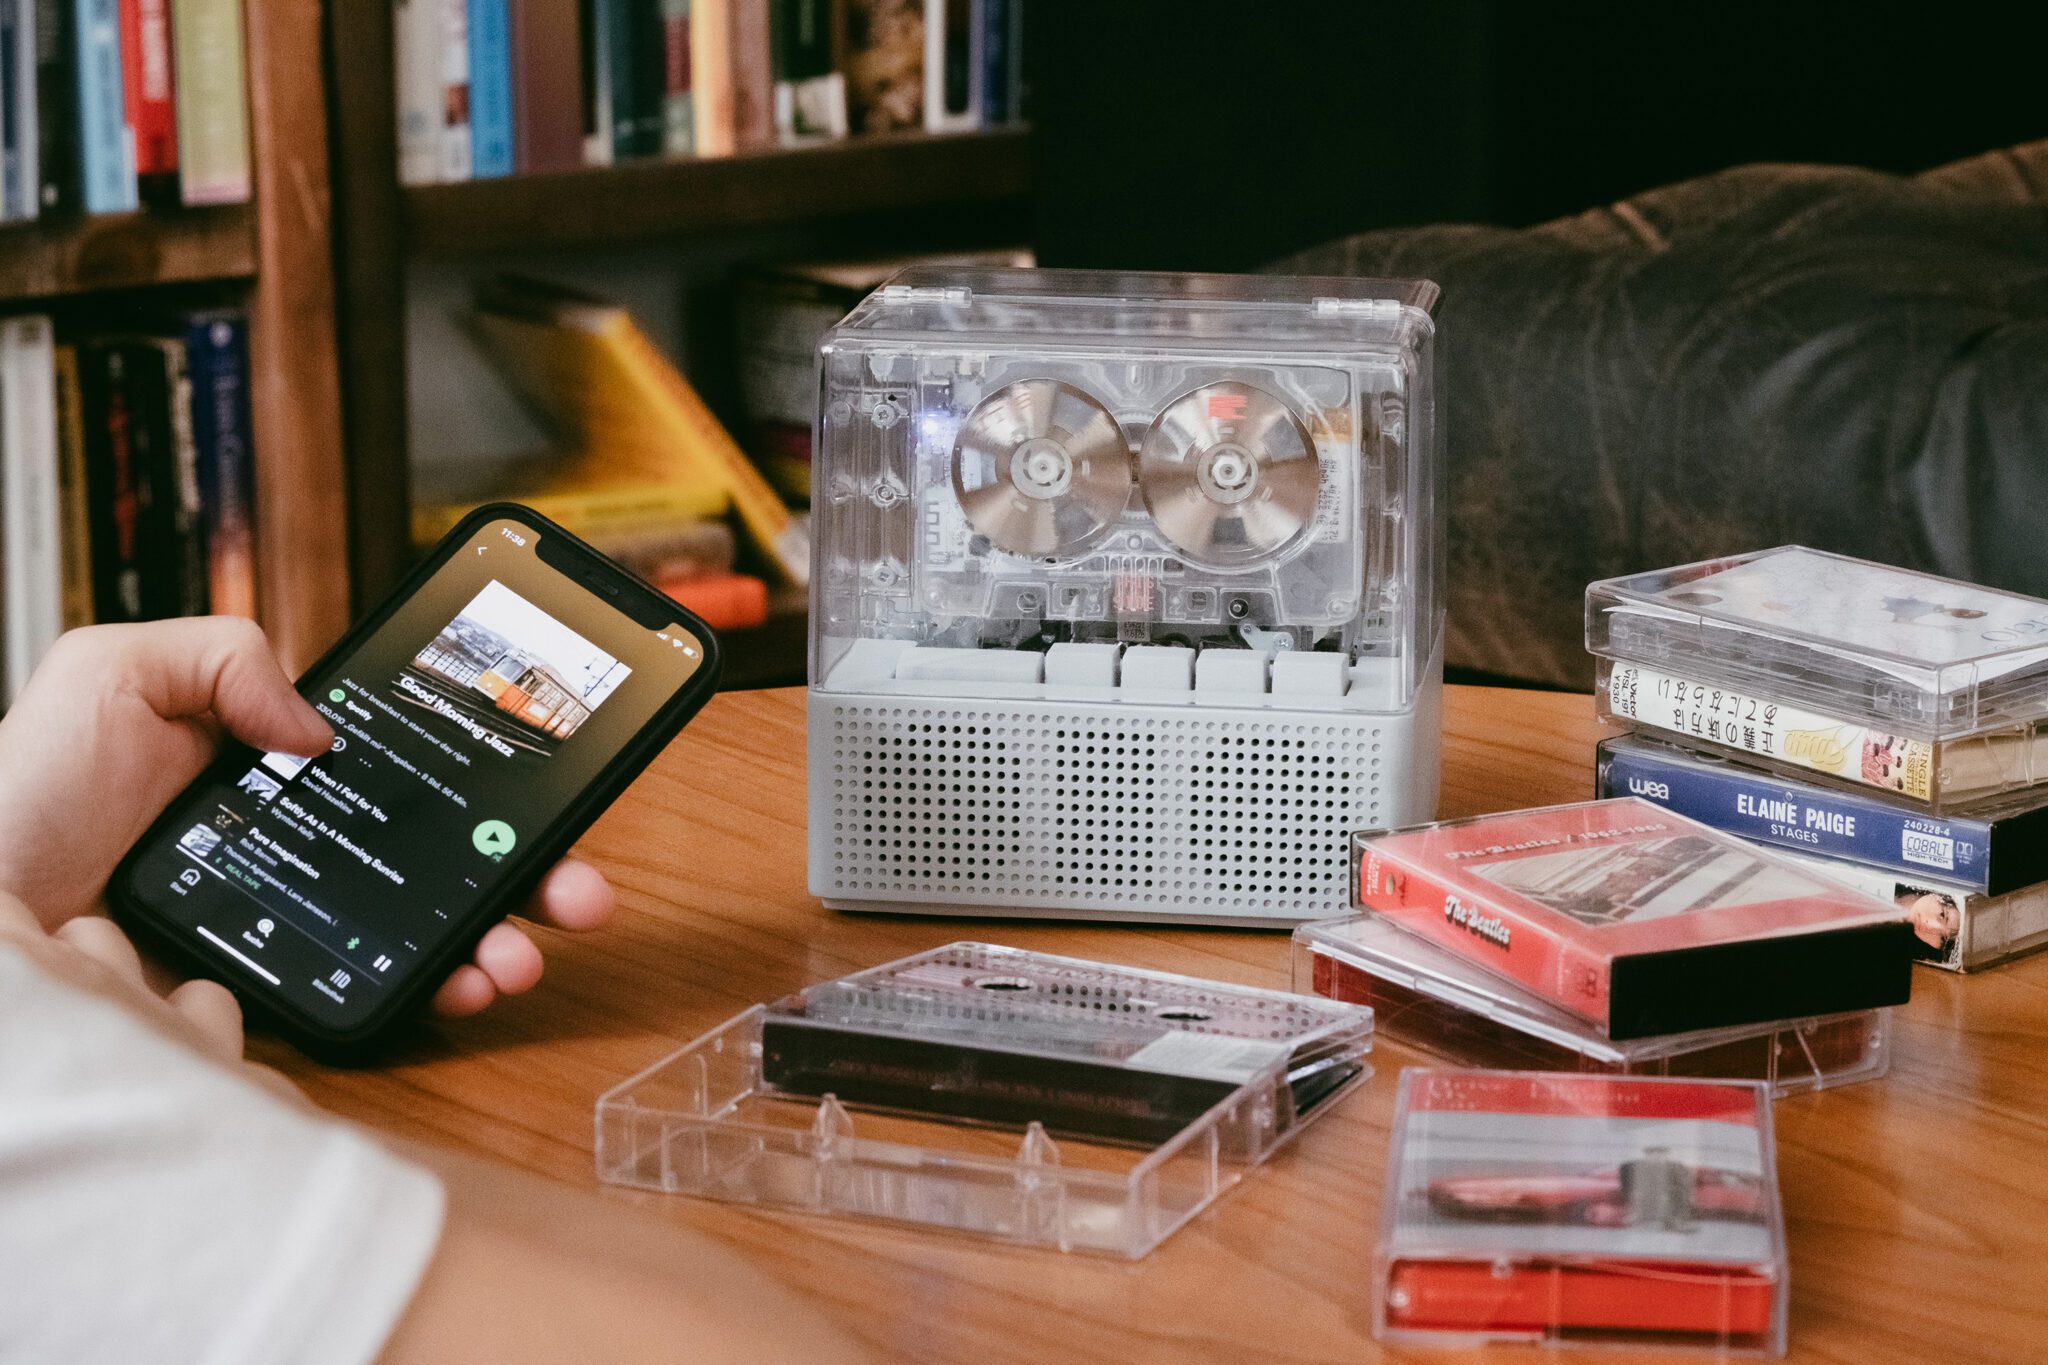 IT’S REAL BLUETOOTH SPEAKER + CASSETTE PLAYER